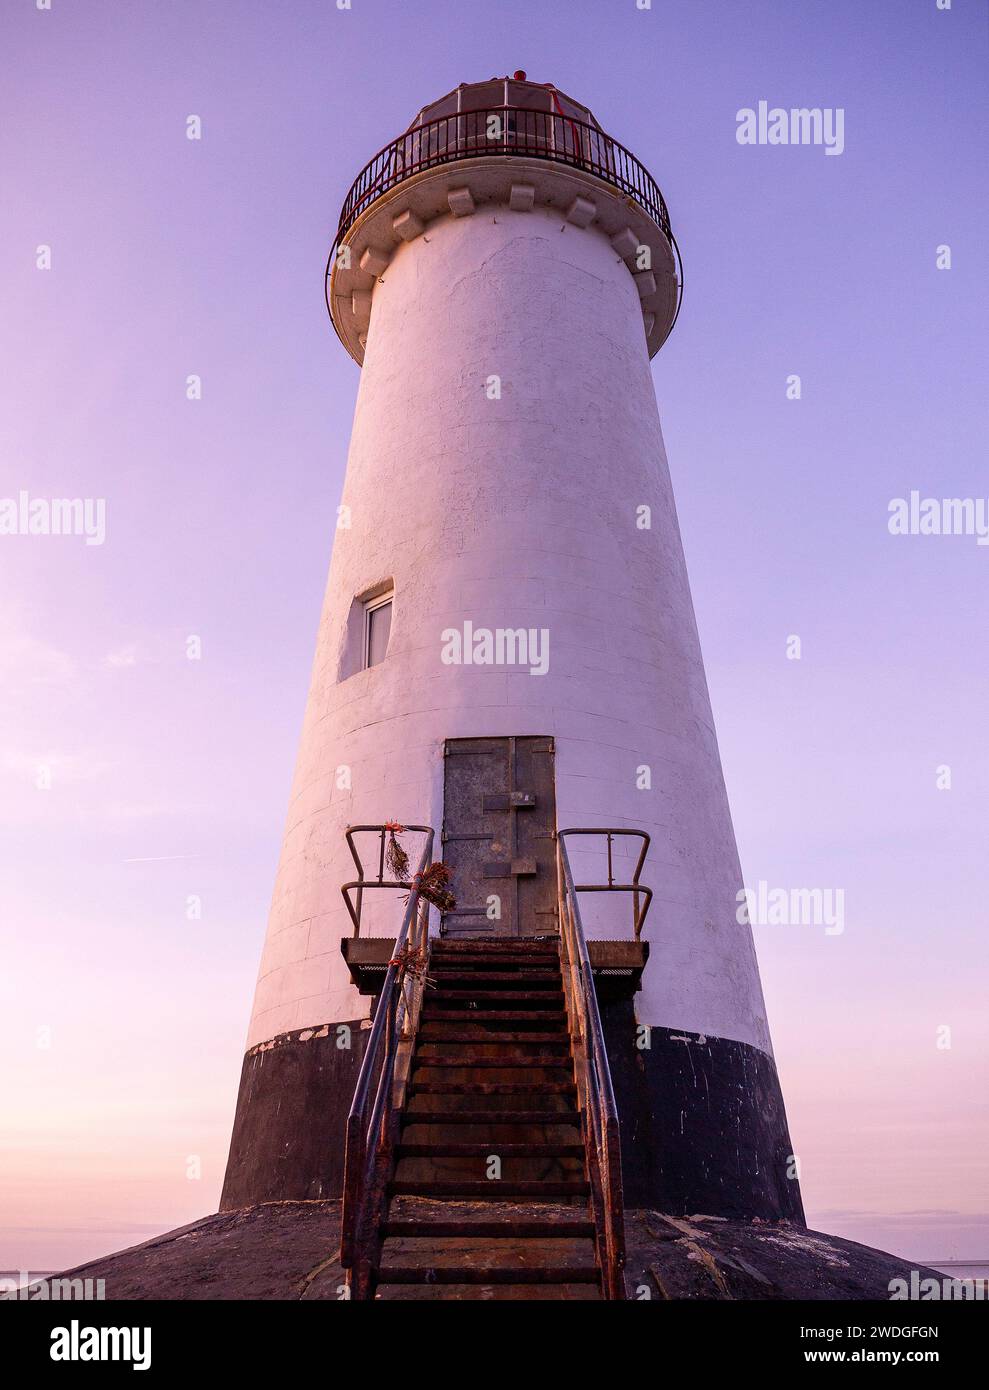 Low angle view of the entrance and staircase to the Point of Ayr Lighthouse at sunset on Talacre Beach, the northernmost point of mainland Wales, UK Stock Photo